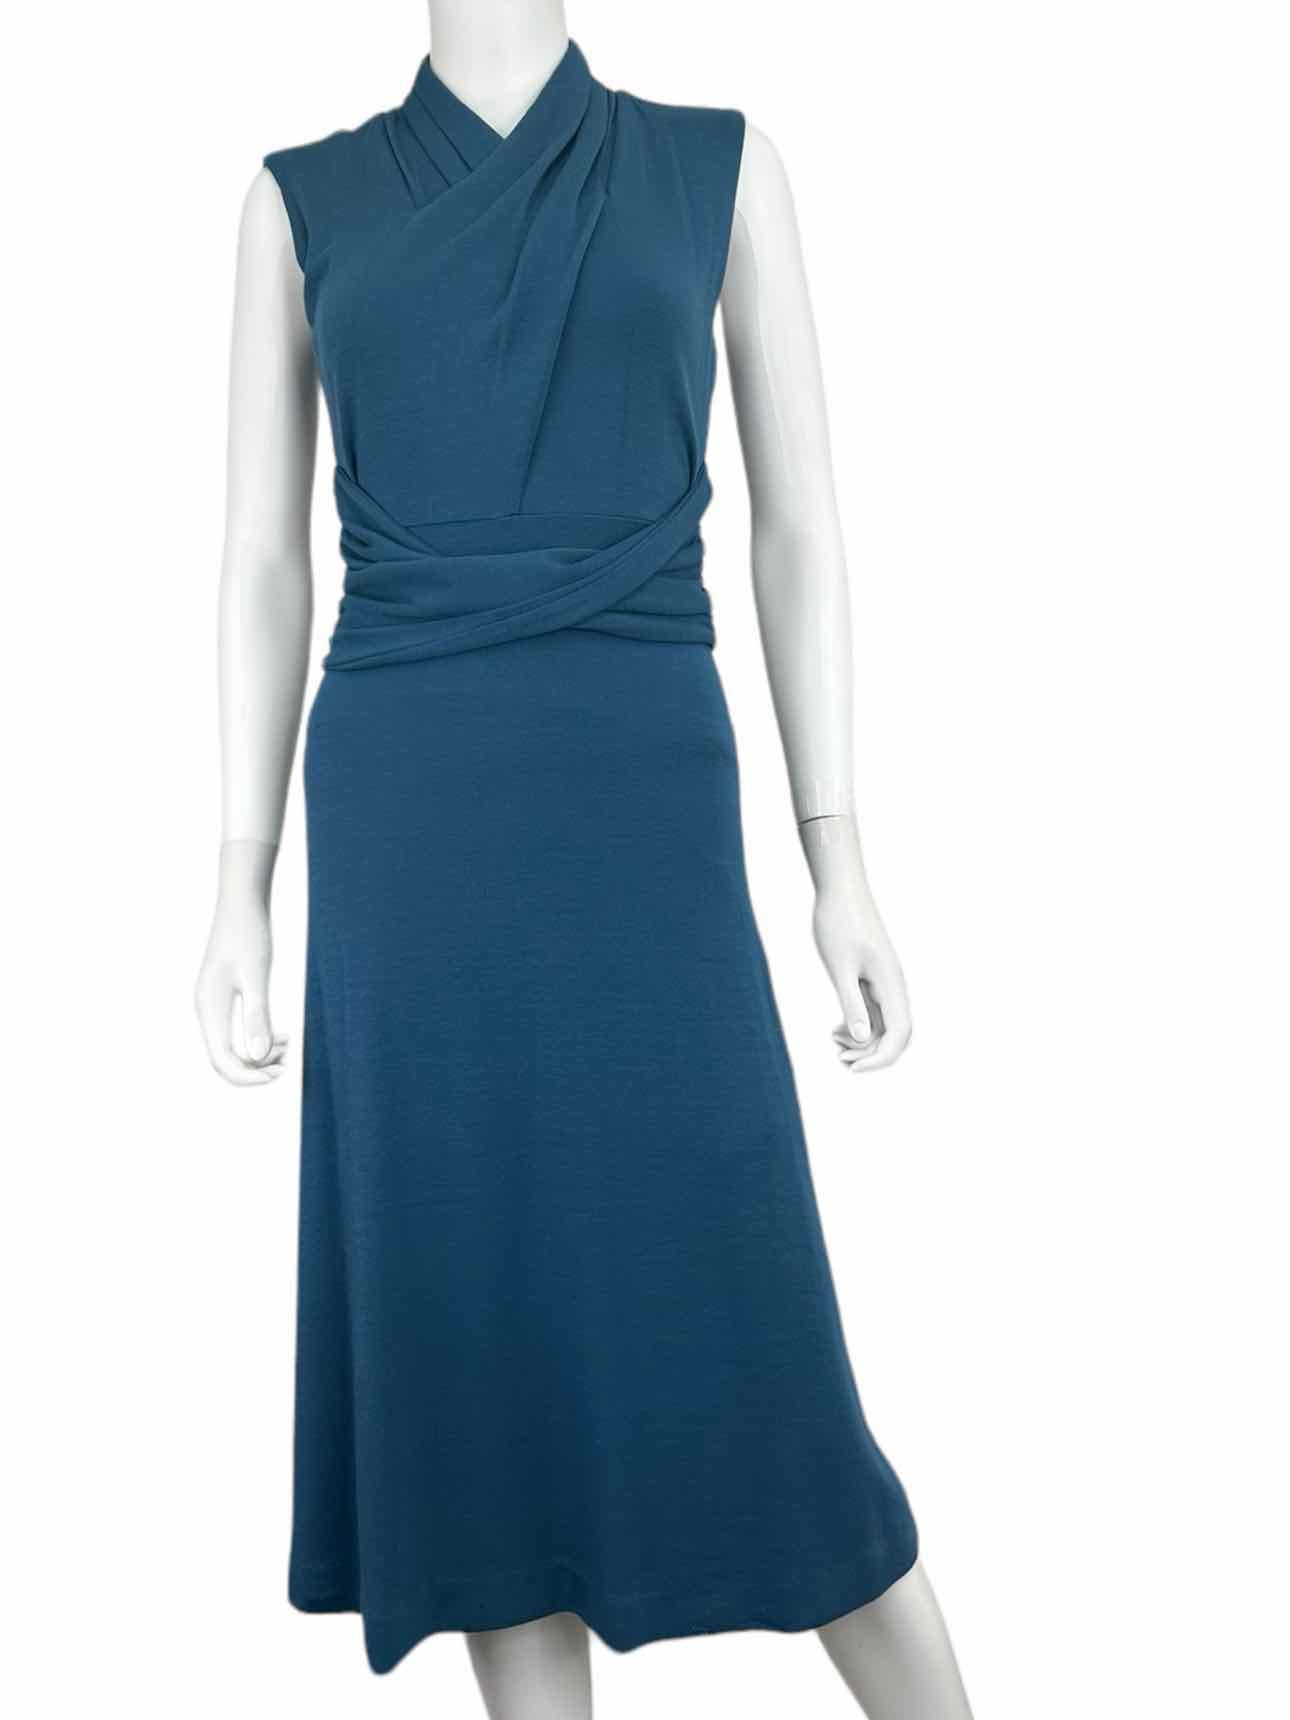 maeve by Anthropologie NWT Teal Midi Dress Size XS